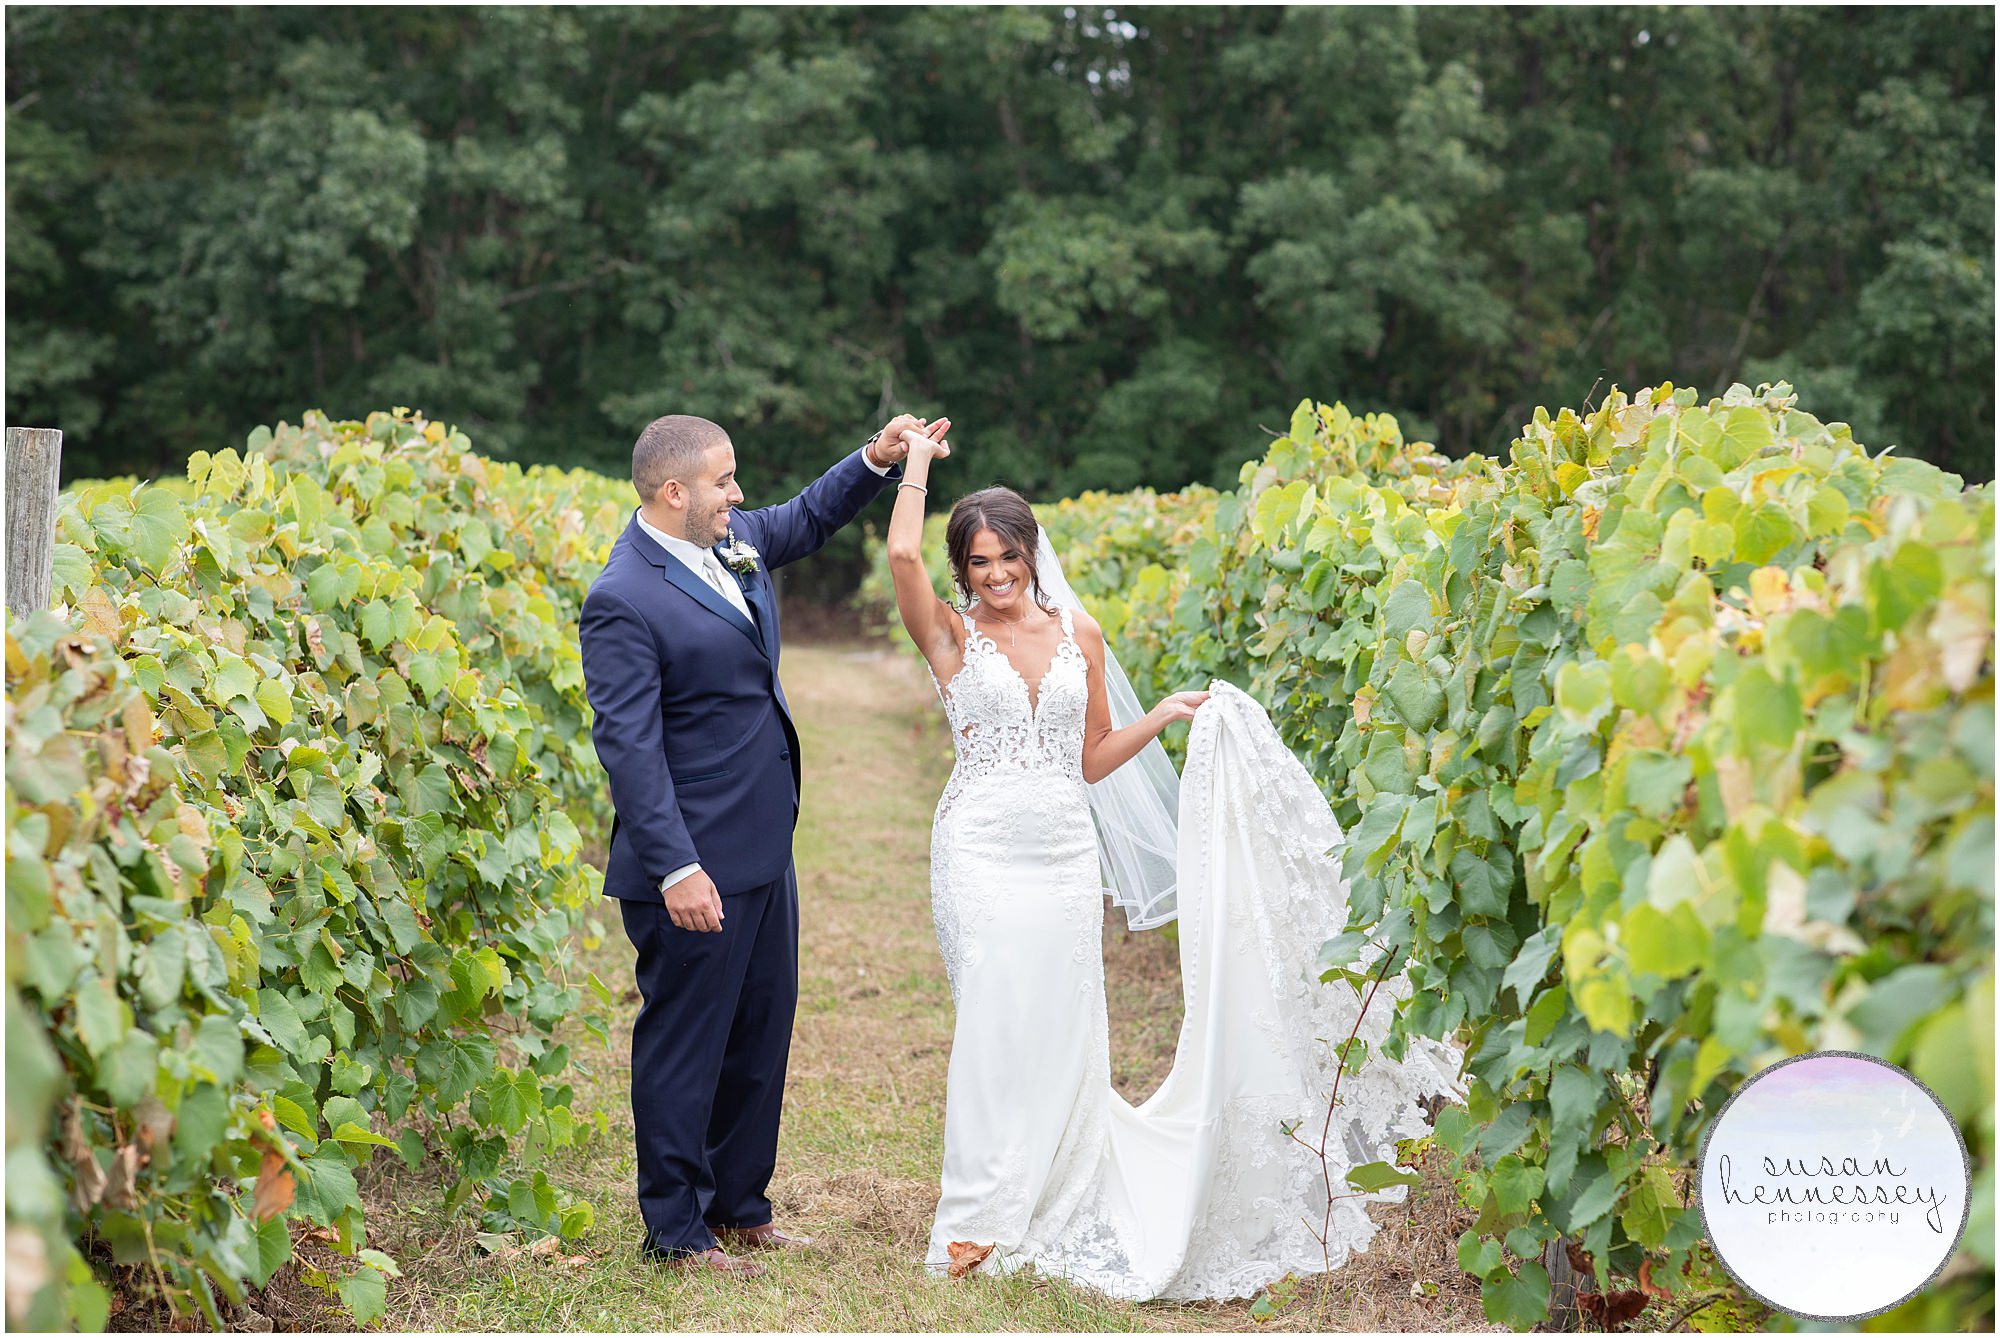 Bride and groom portraits among the vines at Renault Winery wedding